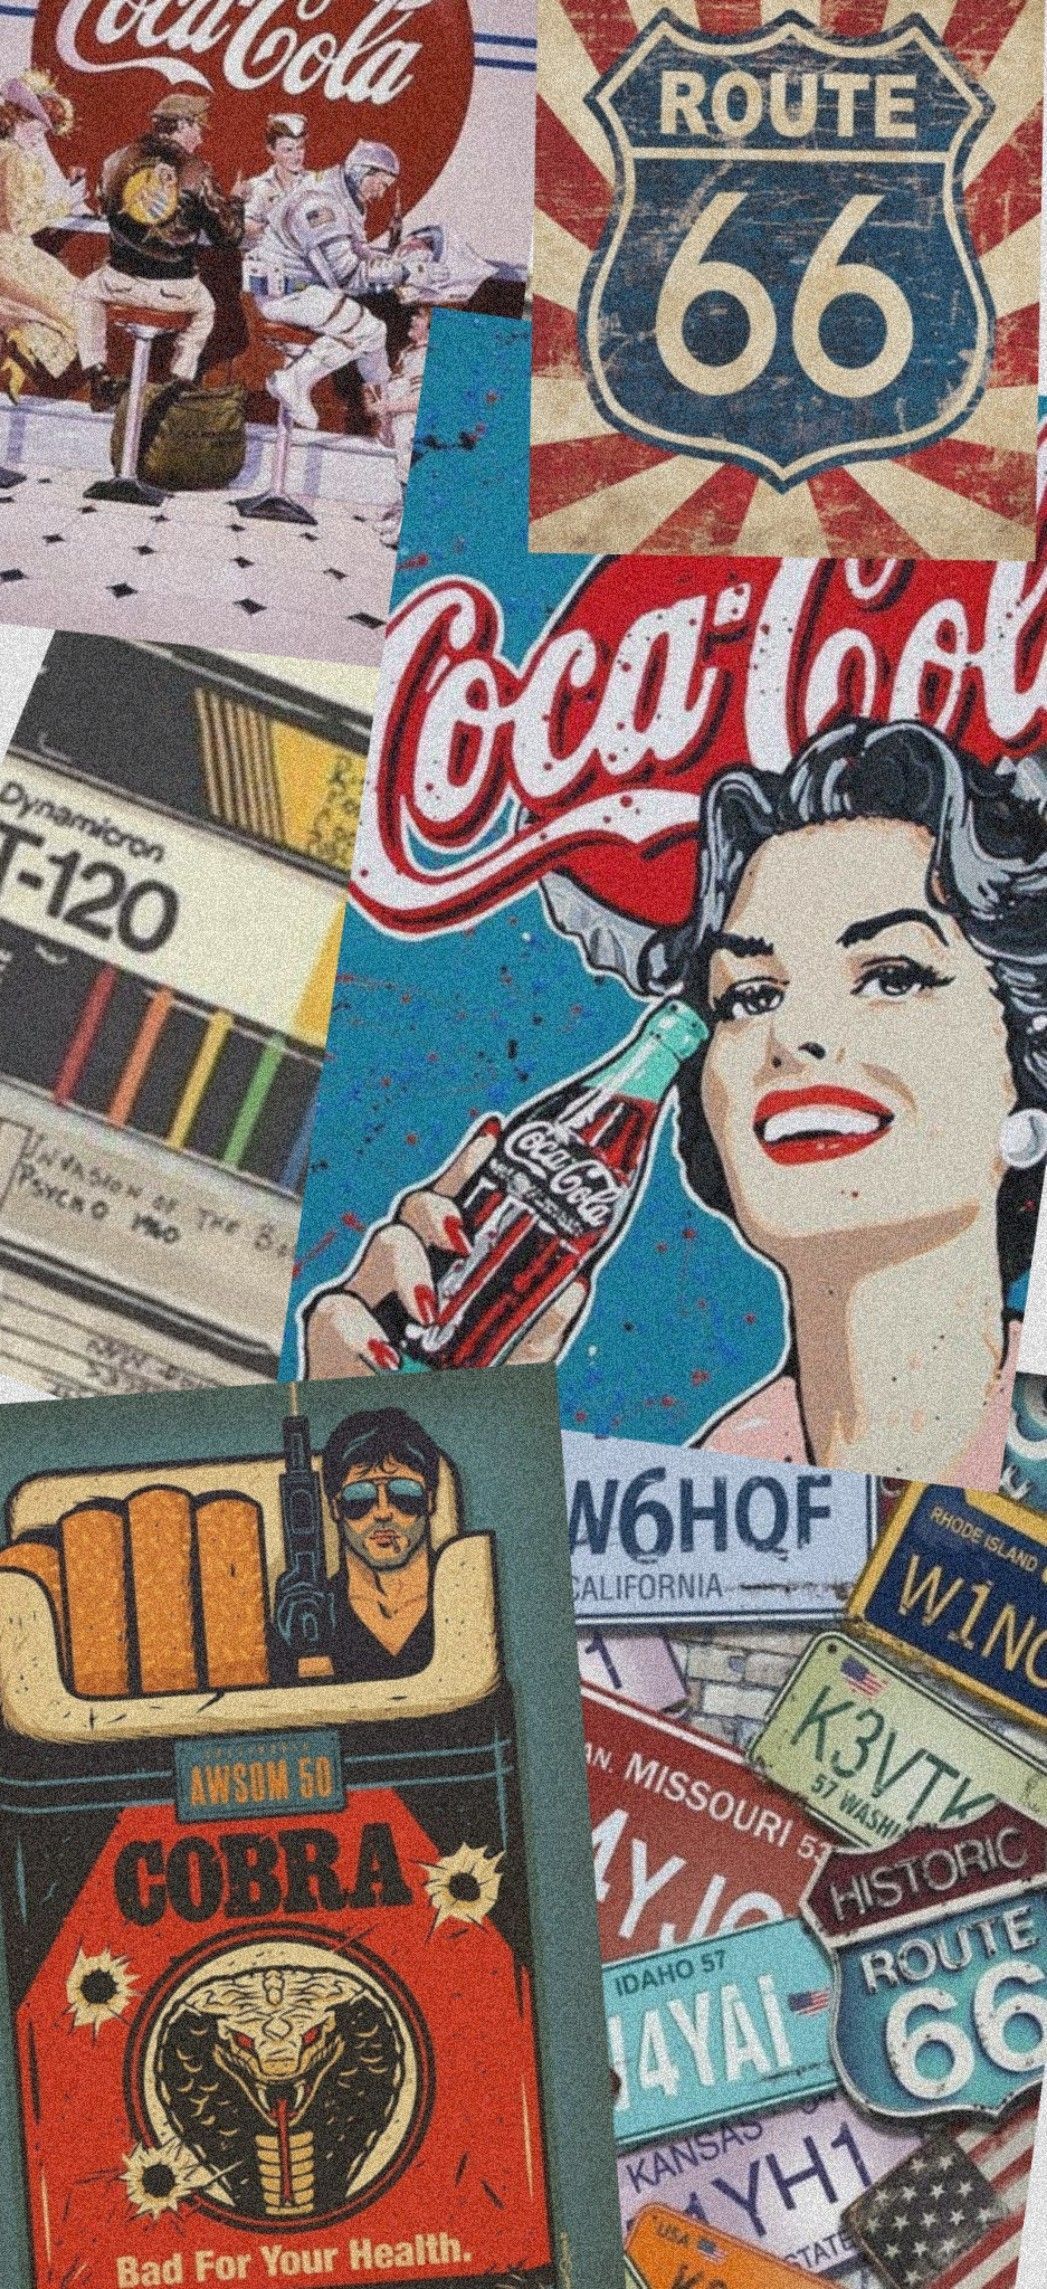 A collection of coca cola and other signs - 60s, 50s